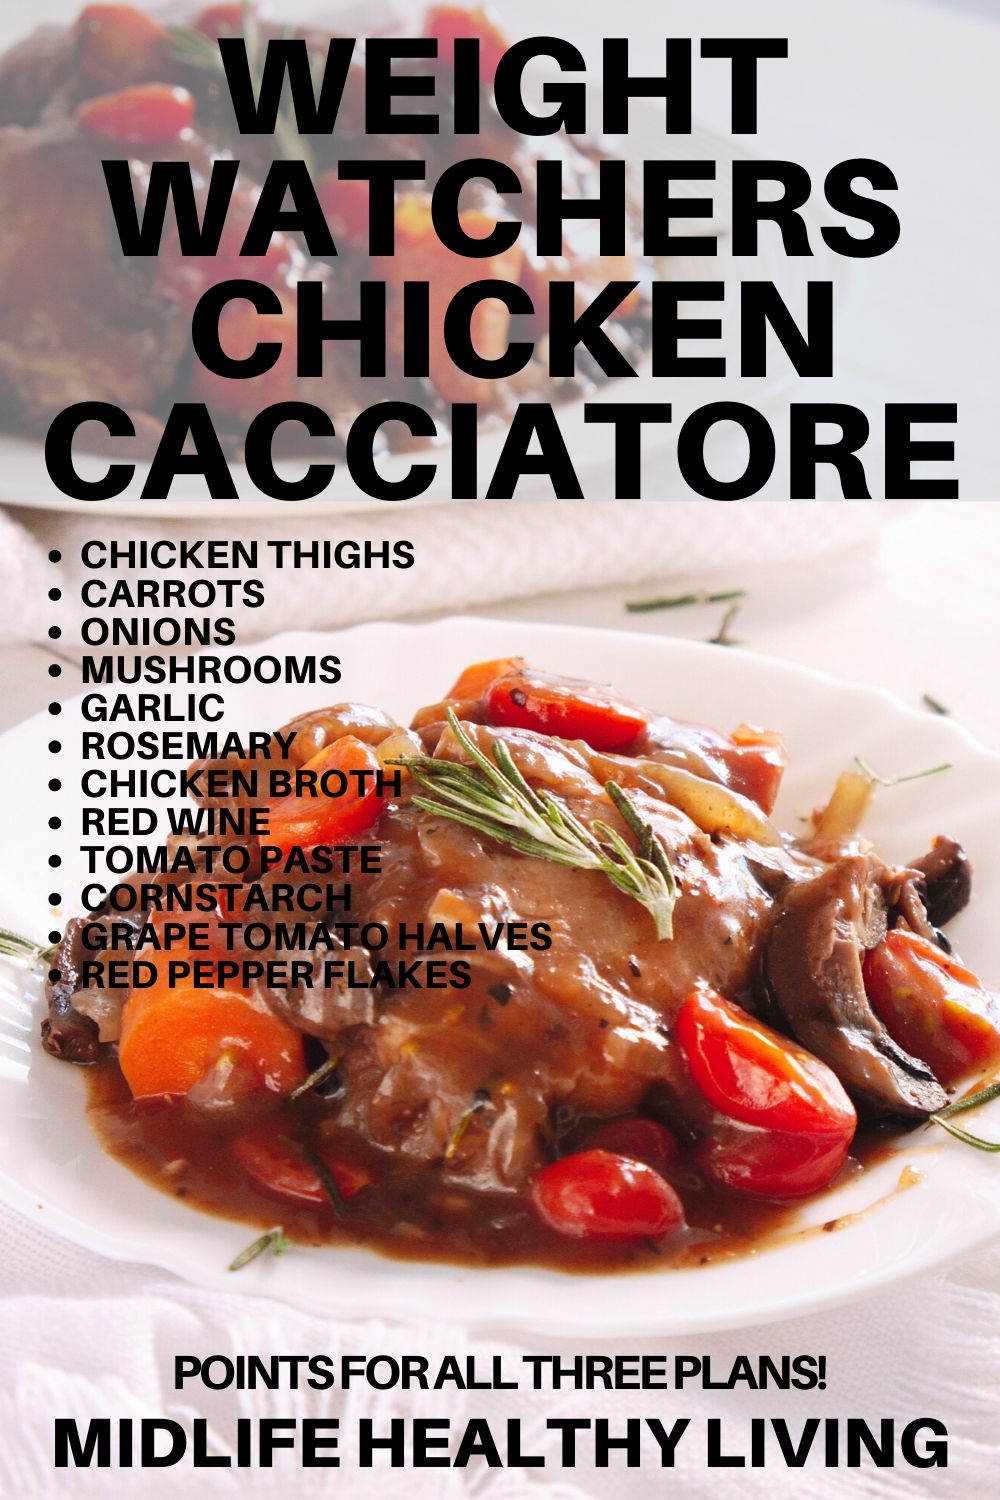 Another pin showing the finished WW chicken cacciatore recipe with ingredients listed across the image.